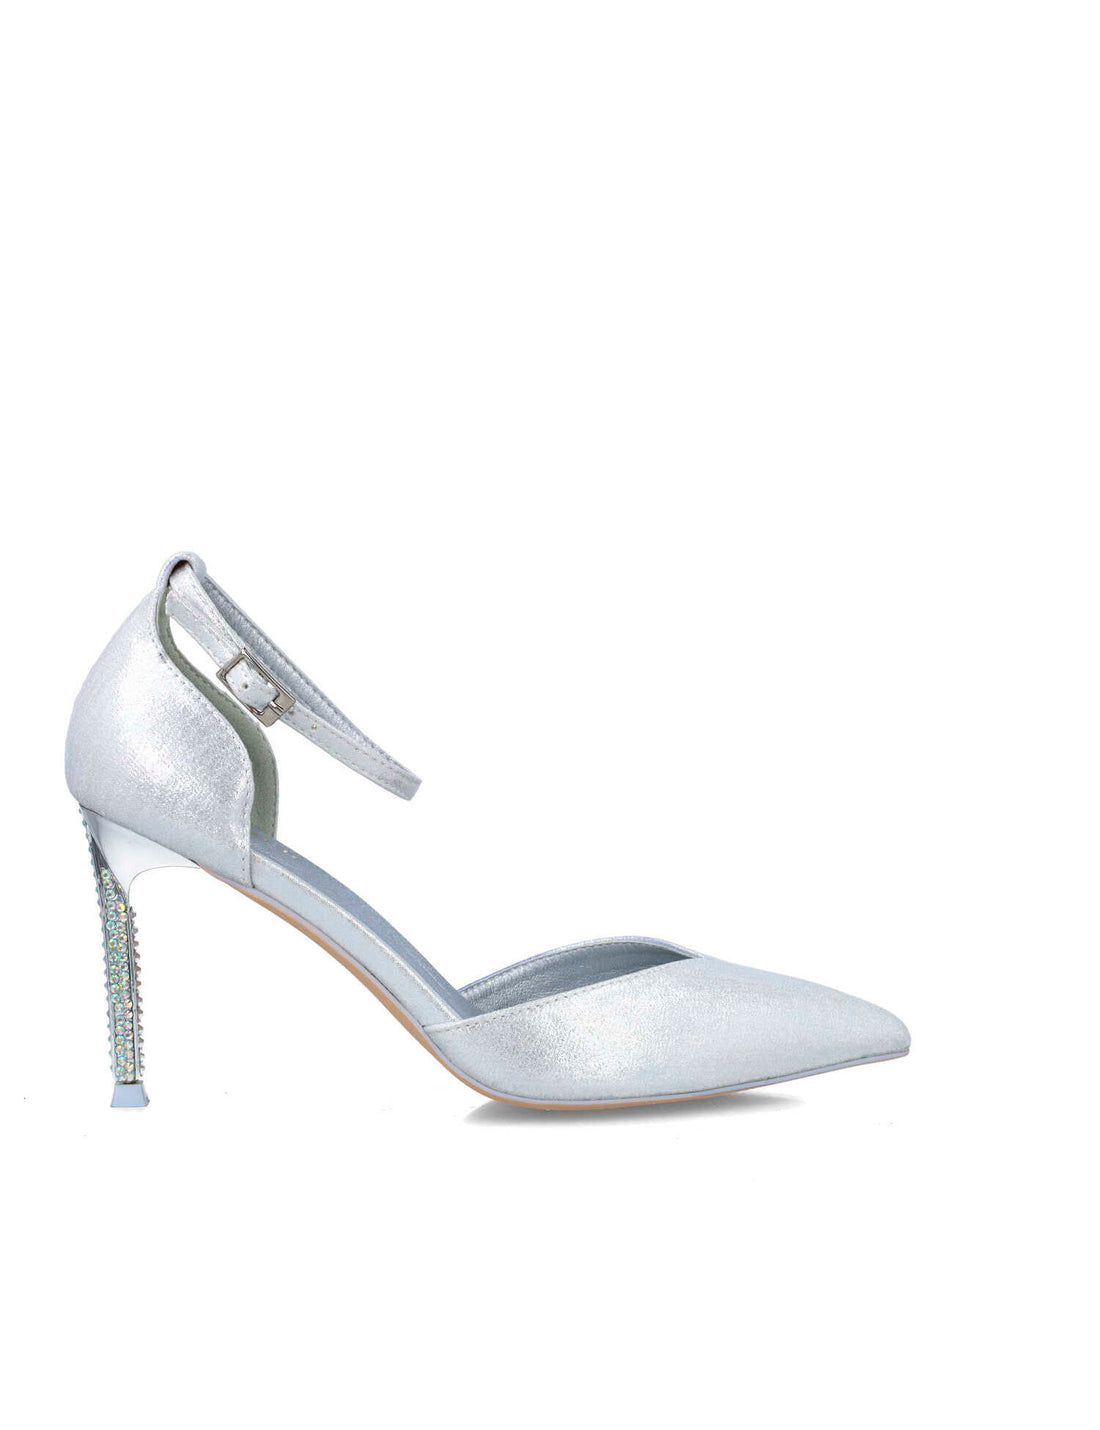 Silver Pumps With Ankle Strap_24710_09_01